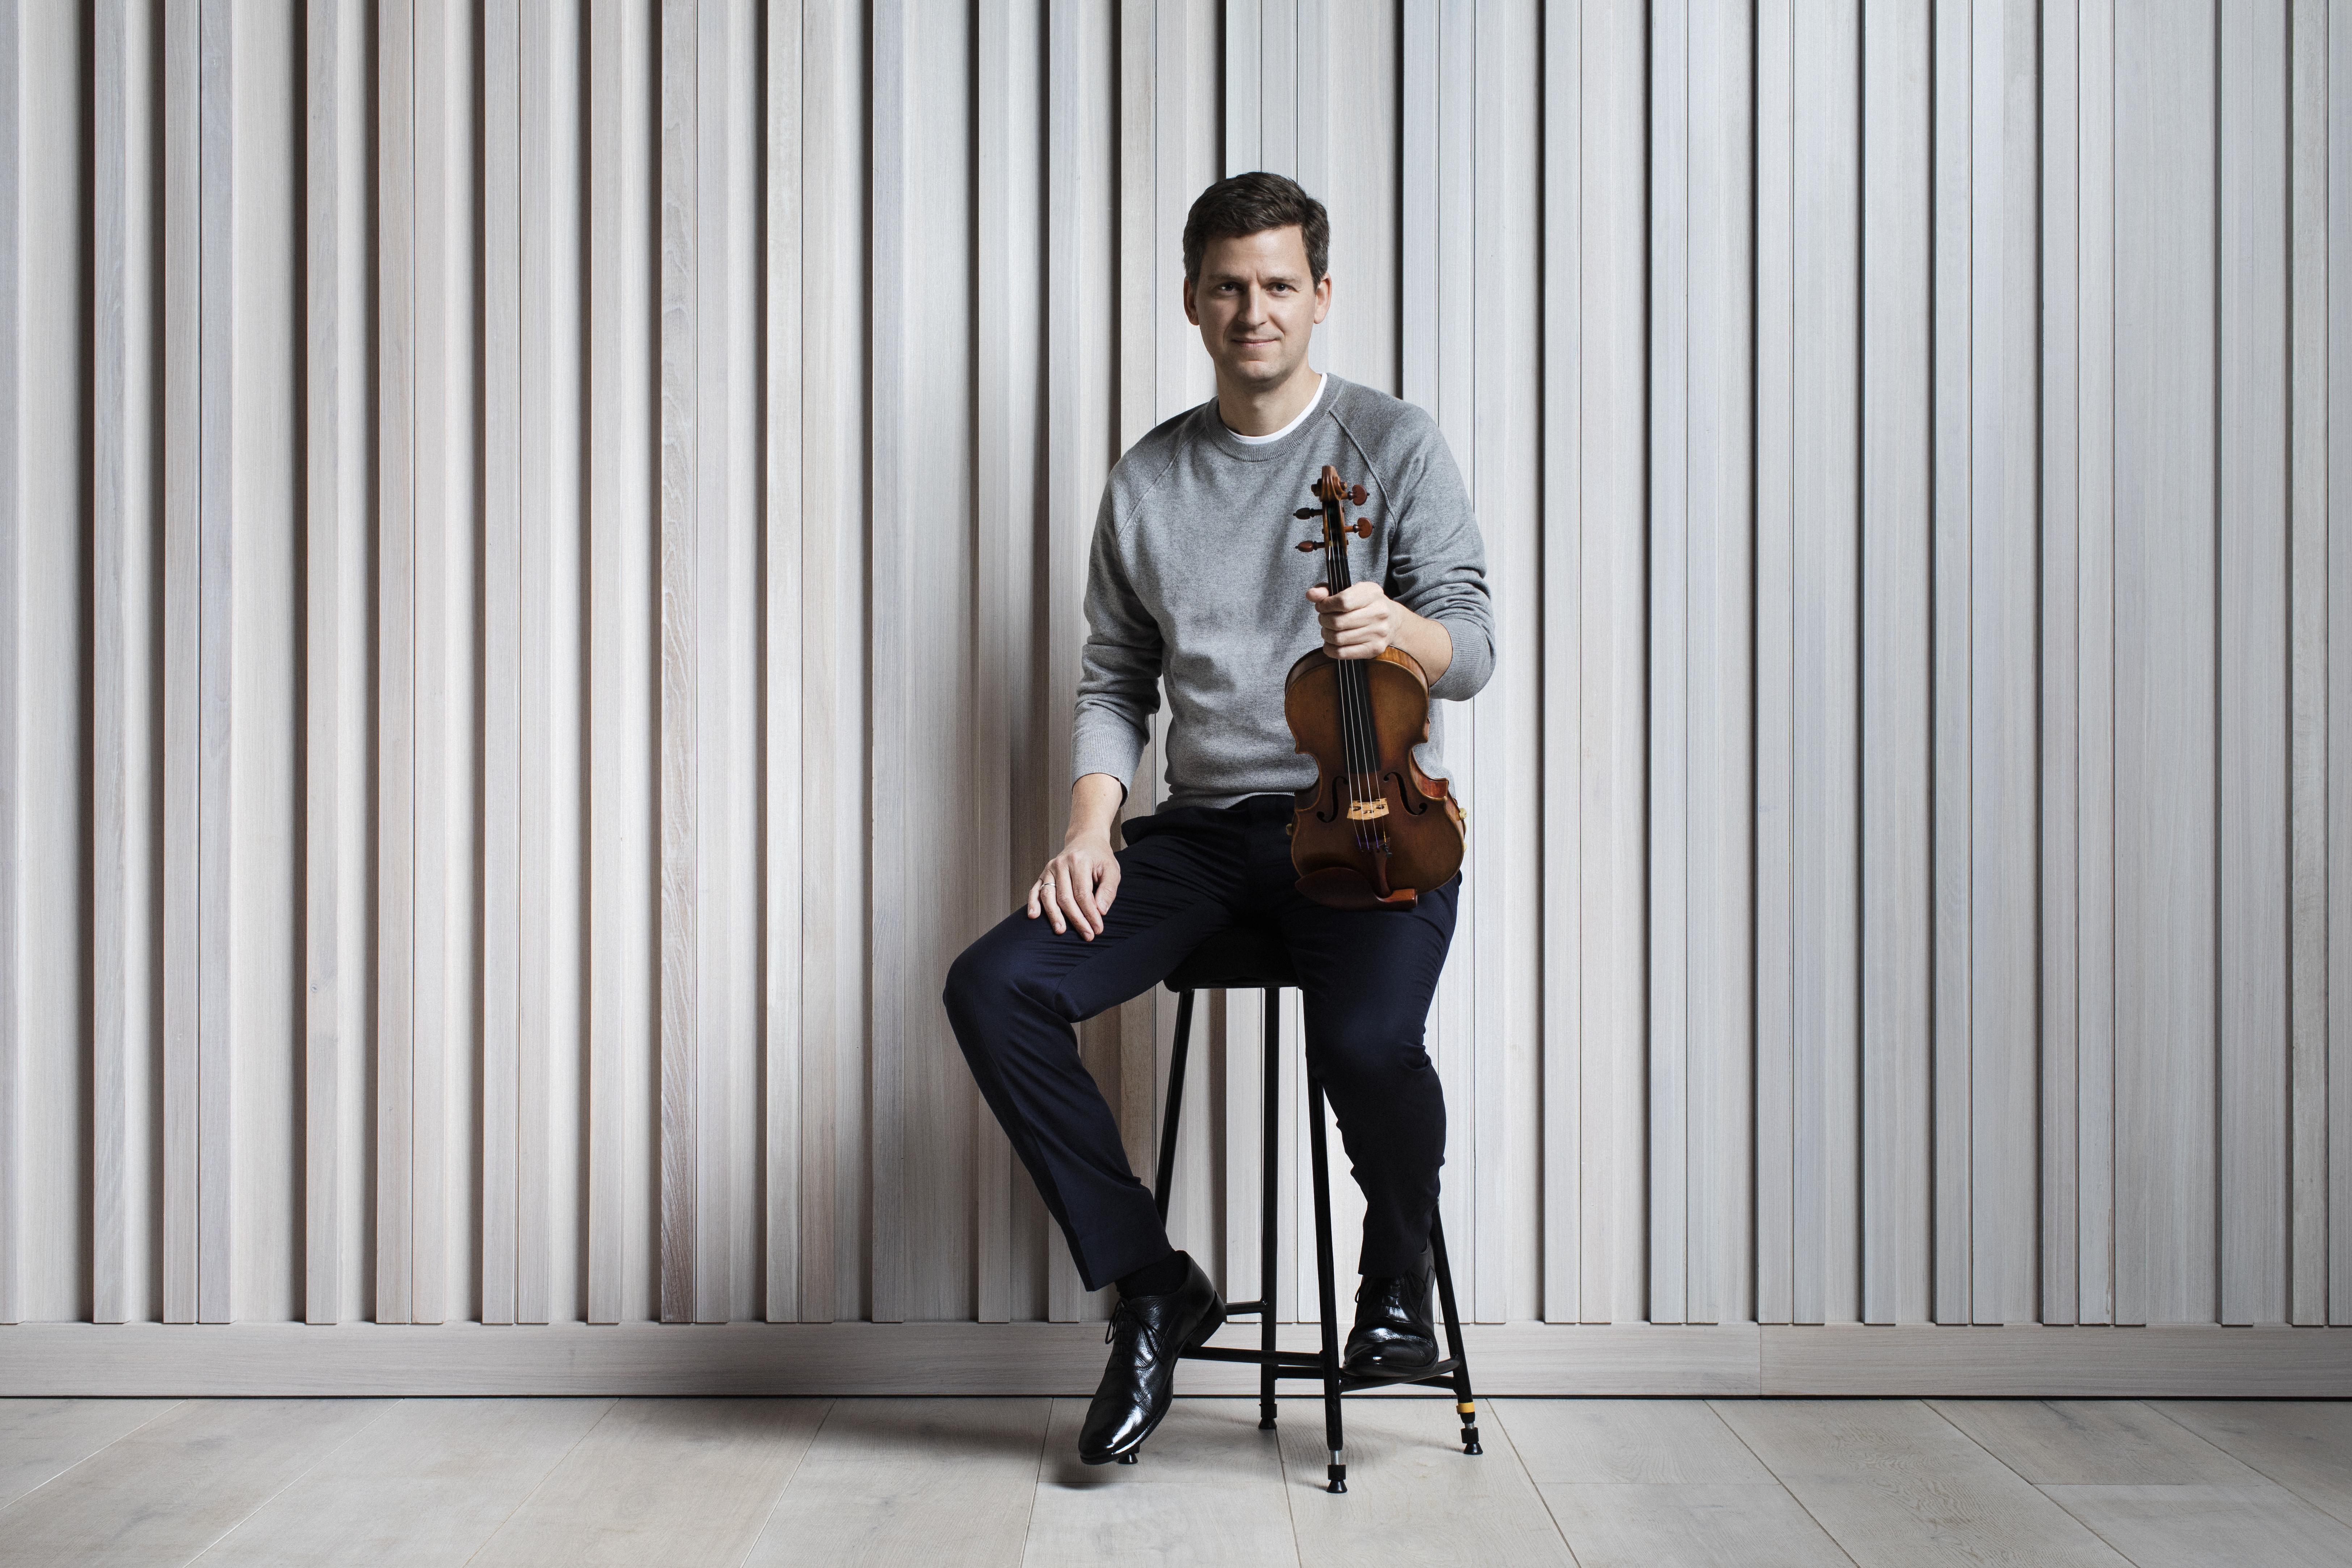 A man in a gray sweater holding a violin and sitting on a stool against a beige wall